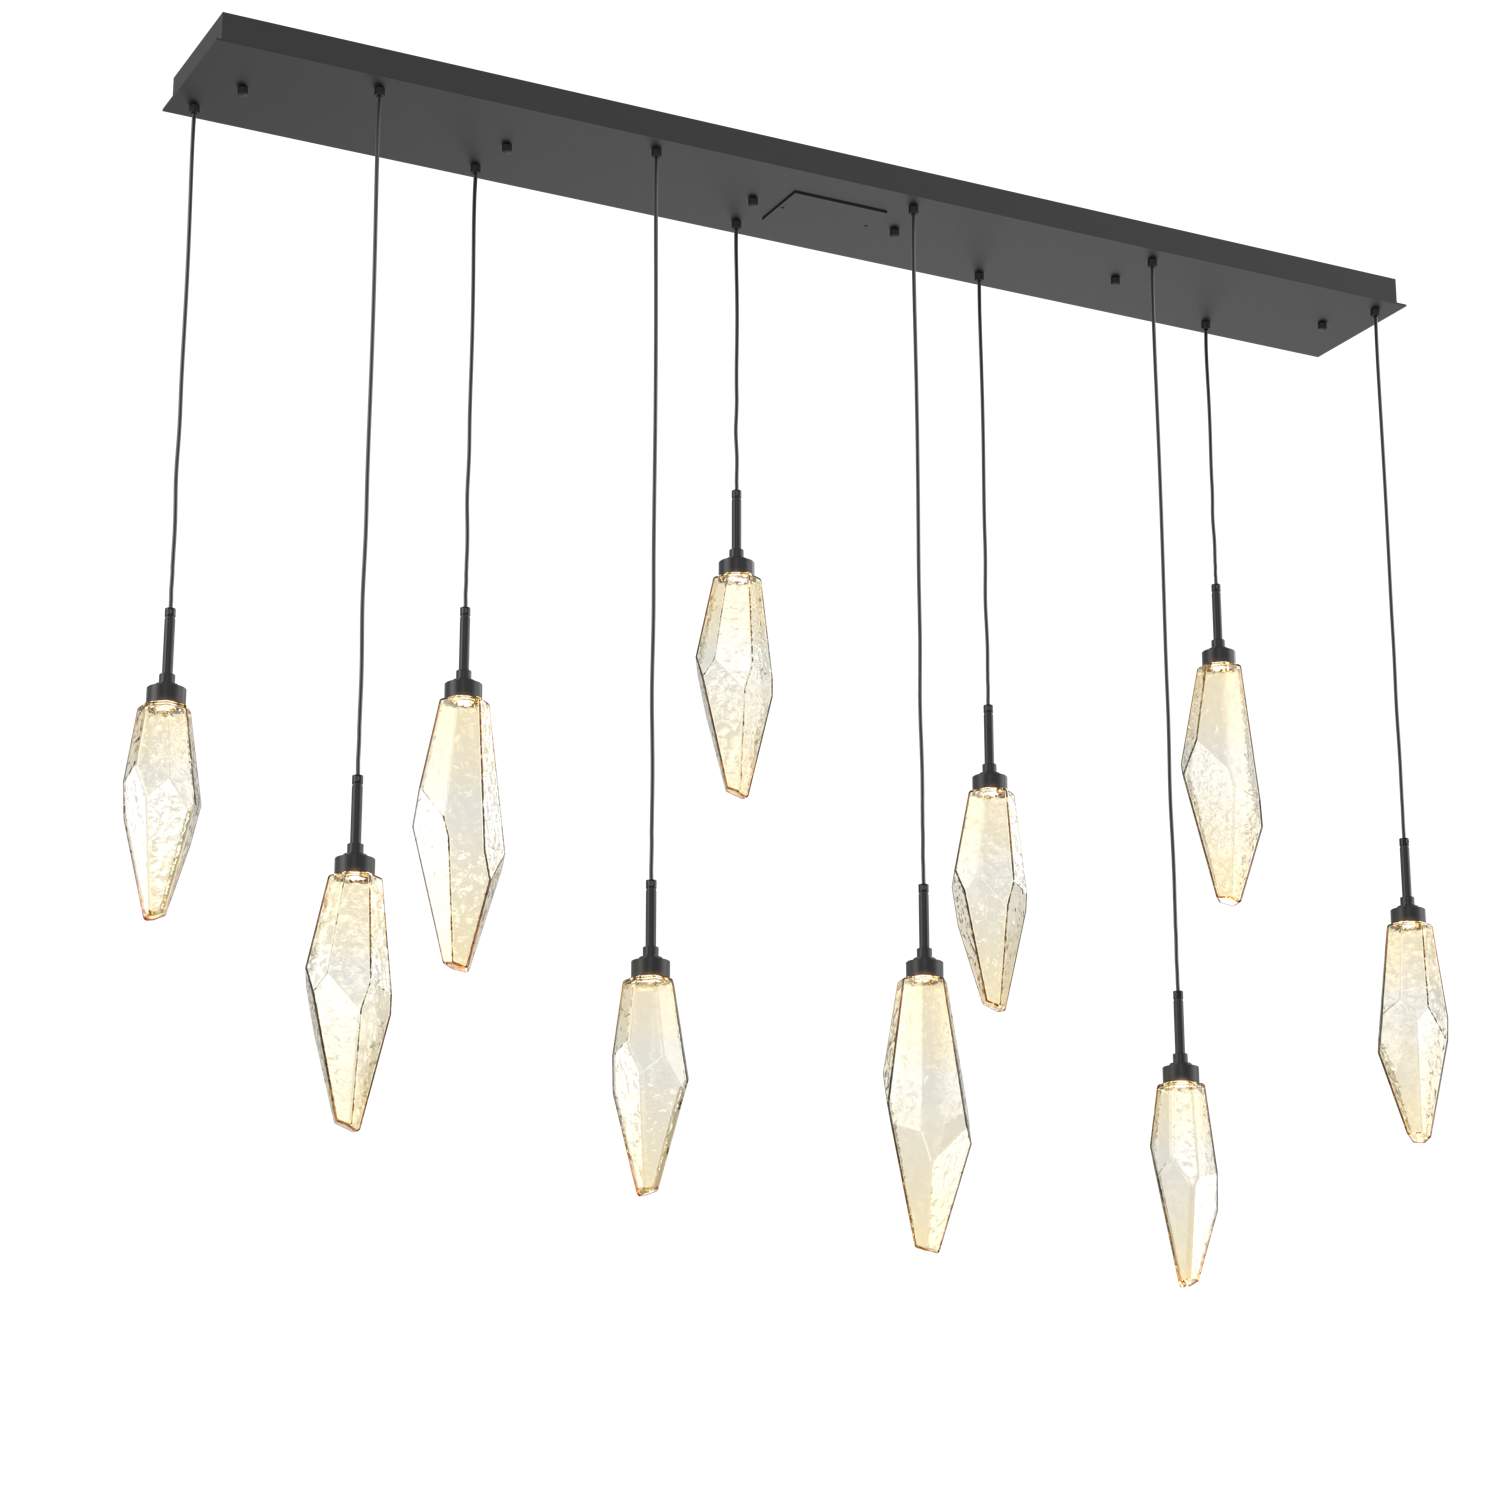 PLB0050-10-MB-CA-Hammerton-Studio-Rock-Crystal-10-light-linear-pendant-chandelier-with-matte-black-finish-and-chilled-amber-blown-glass-shades-and-LED-lamping